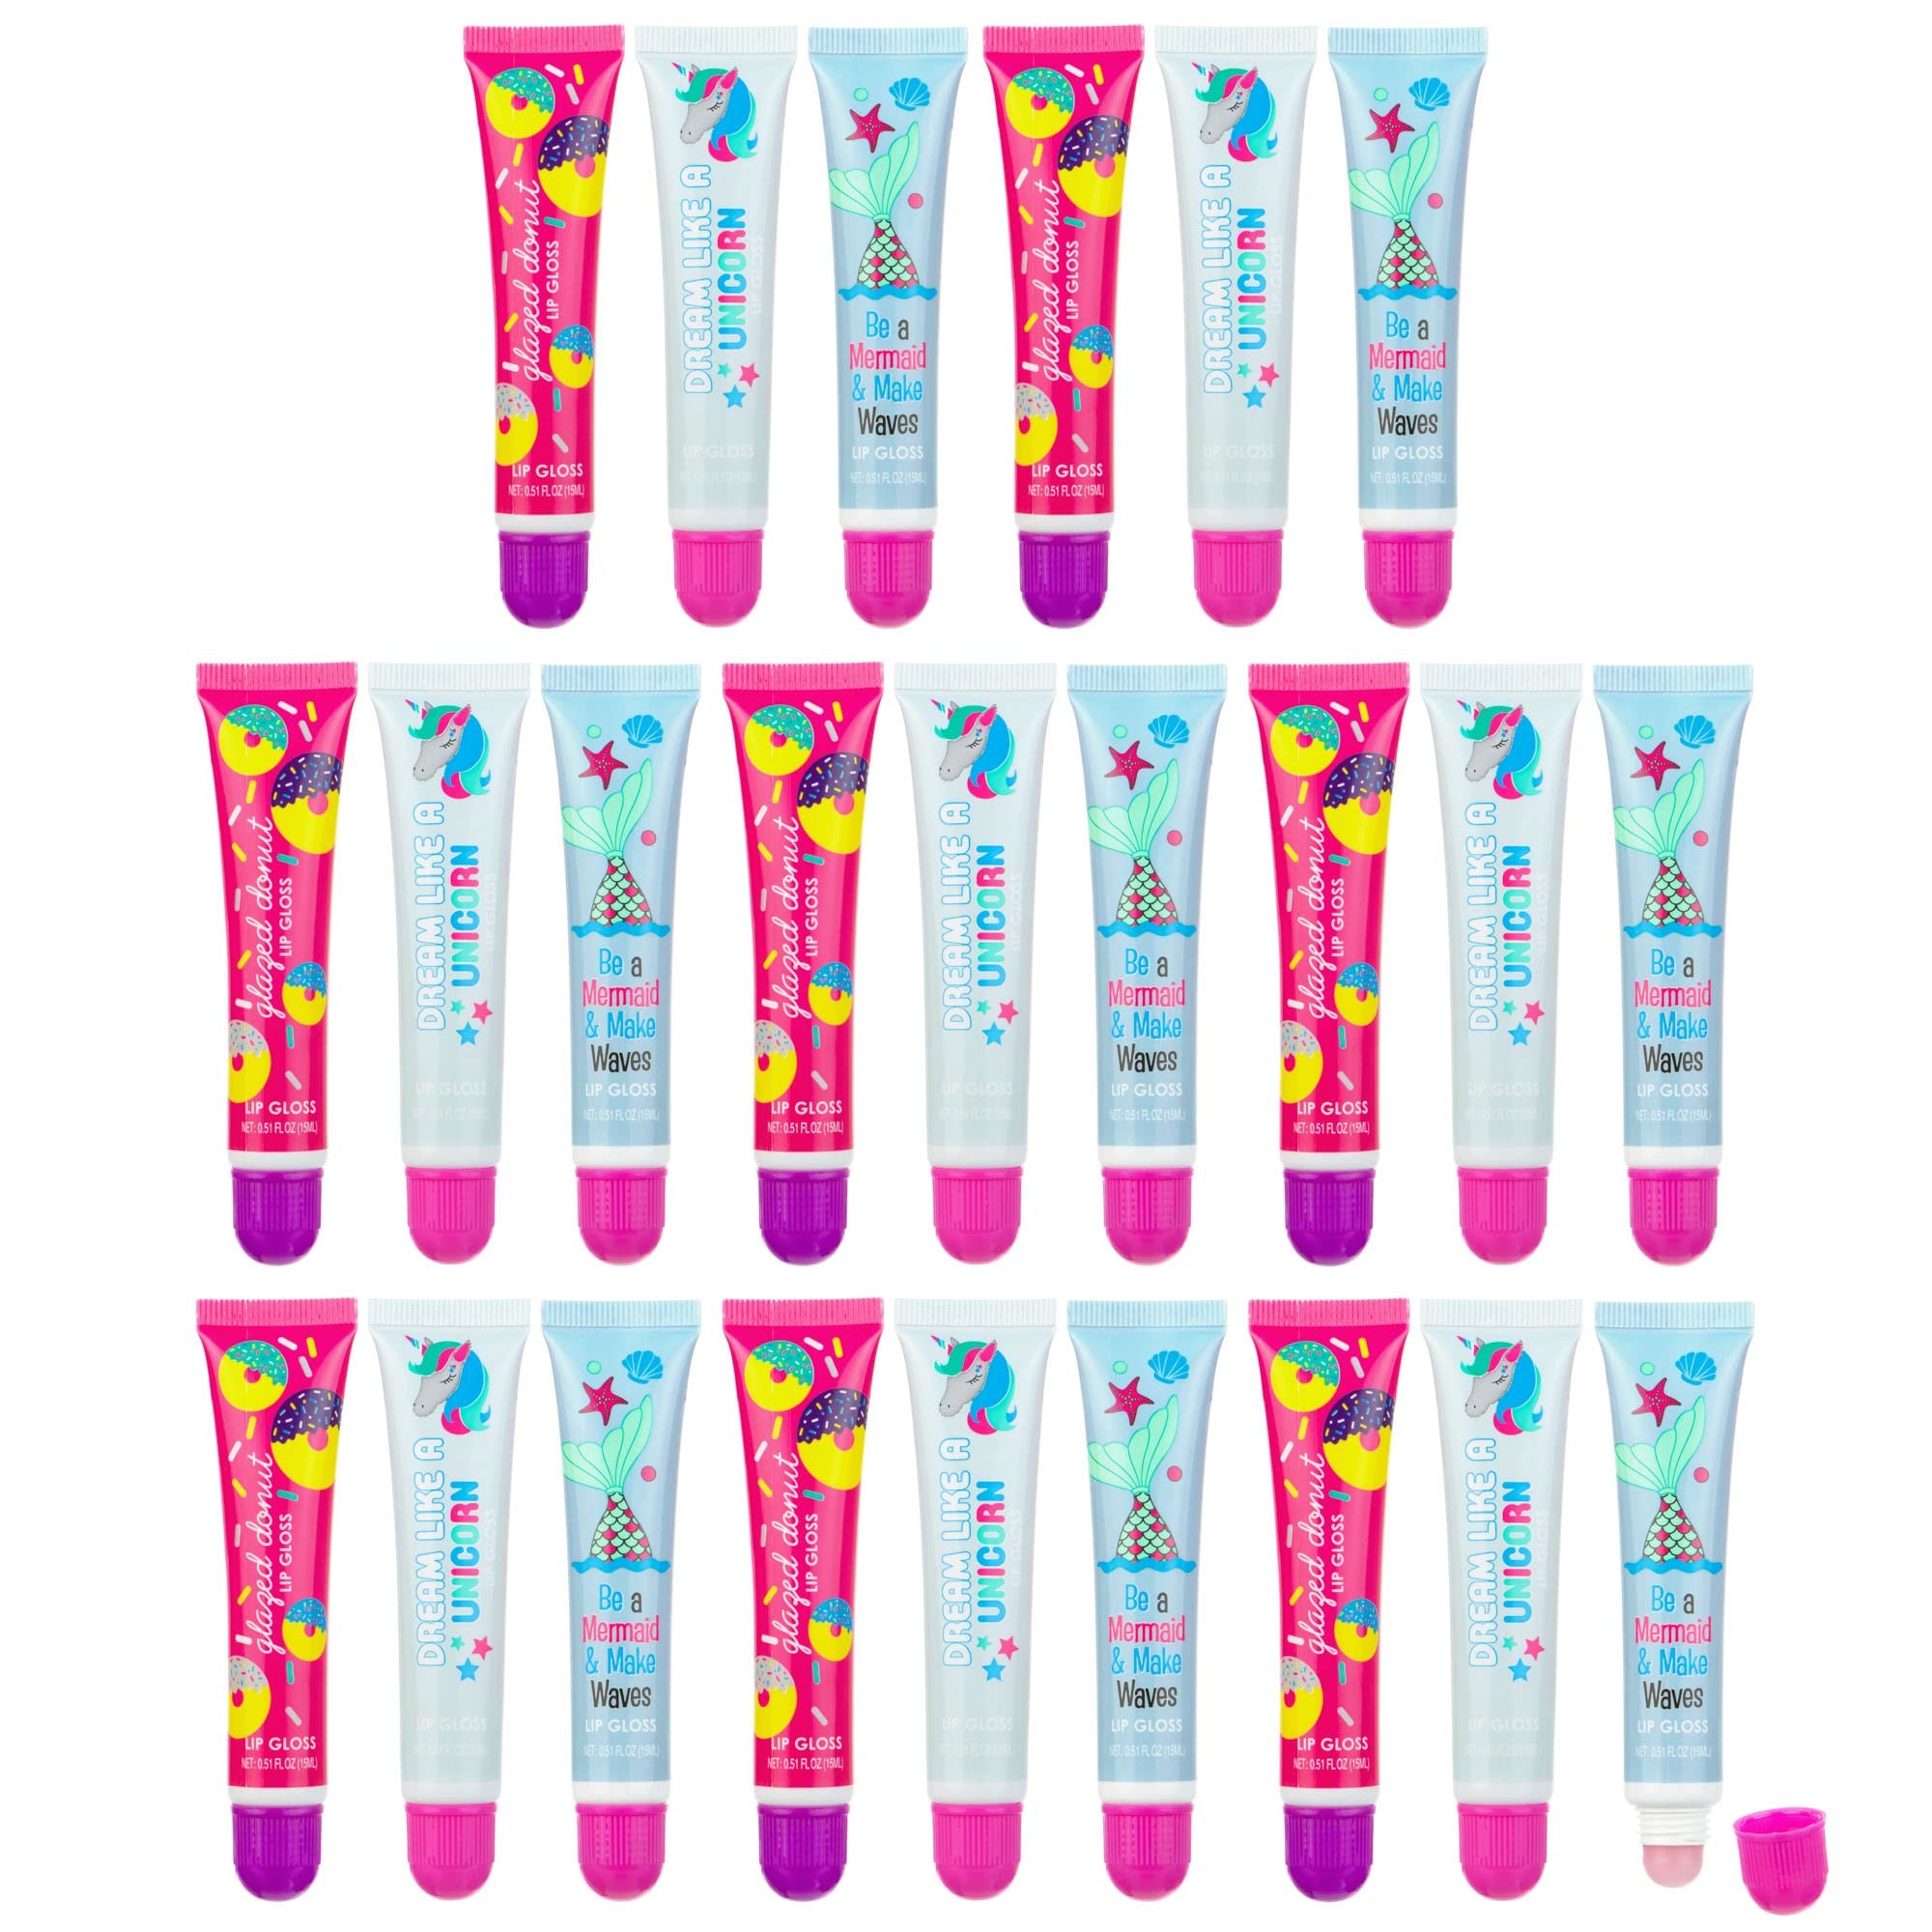 Expressions 24pc Flavored Lip Gloss for Kids and Teens - Unicorn Themed Lip  Gloss in Assorted Fruity Flavors Unicorn Gifts for Girls Party Favors Teen  Girls Trendy Stuff Non Toxic Makeup for